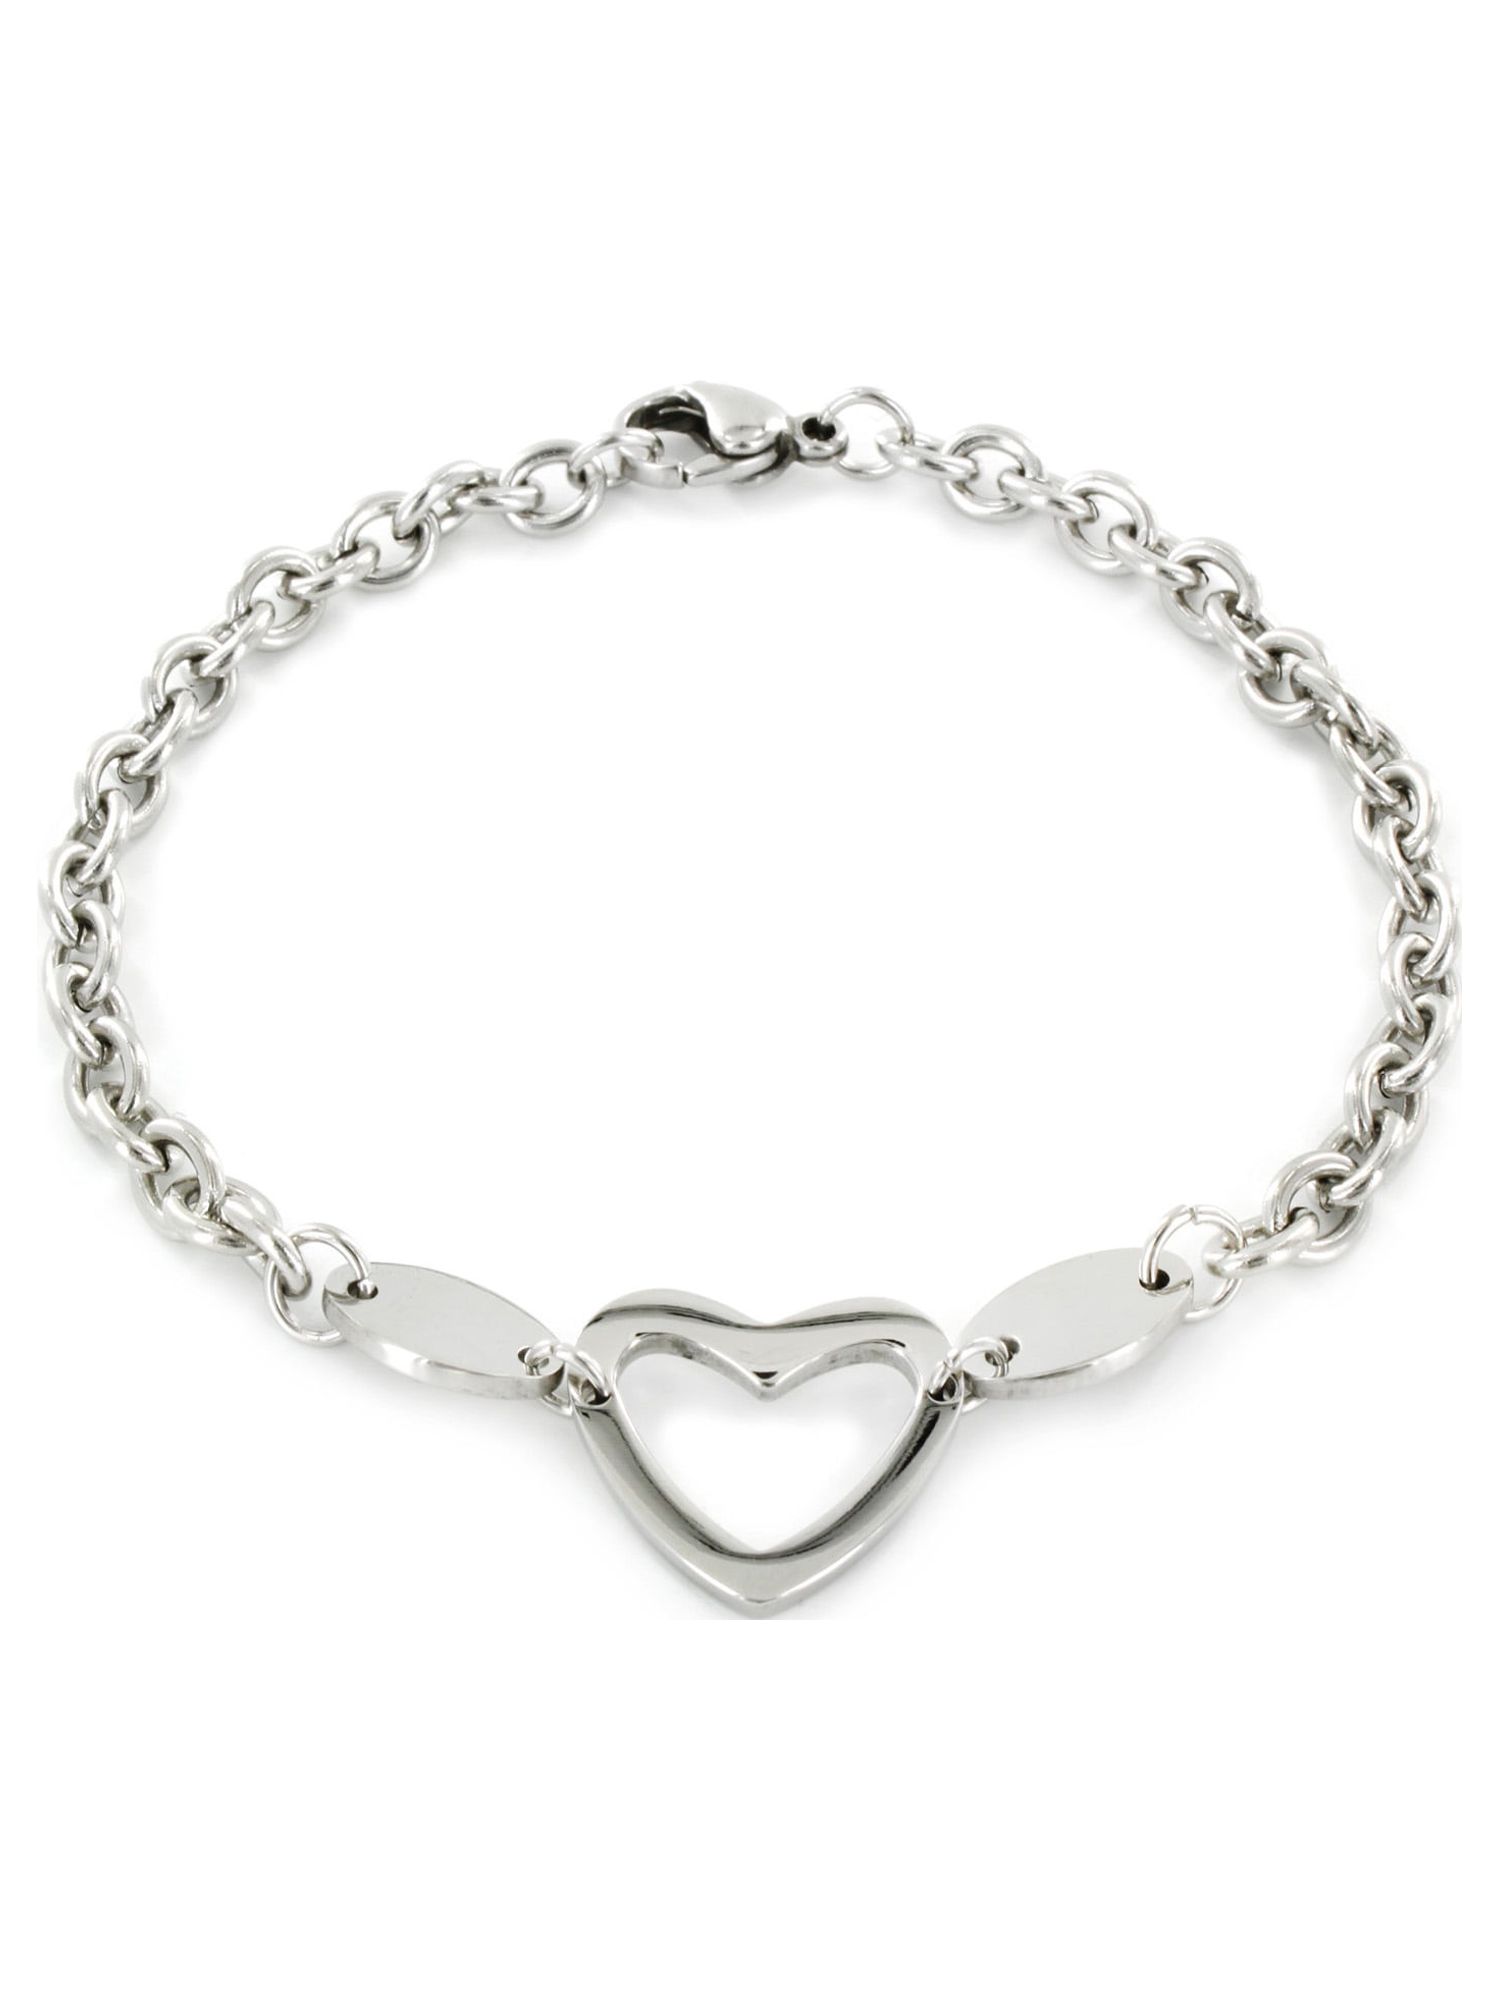 Stainless Steel Polished Heart Cut-out Charm Bracelet - image 1 of 4